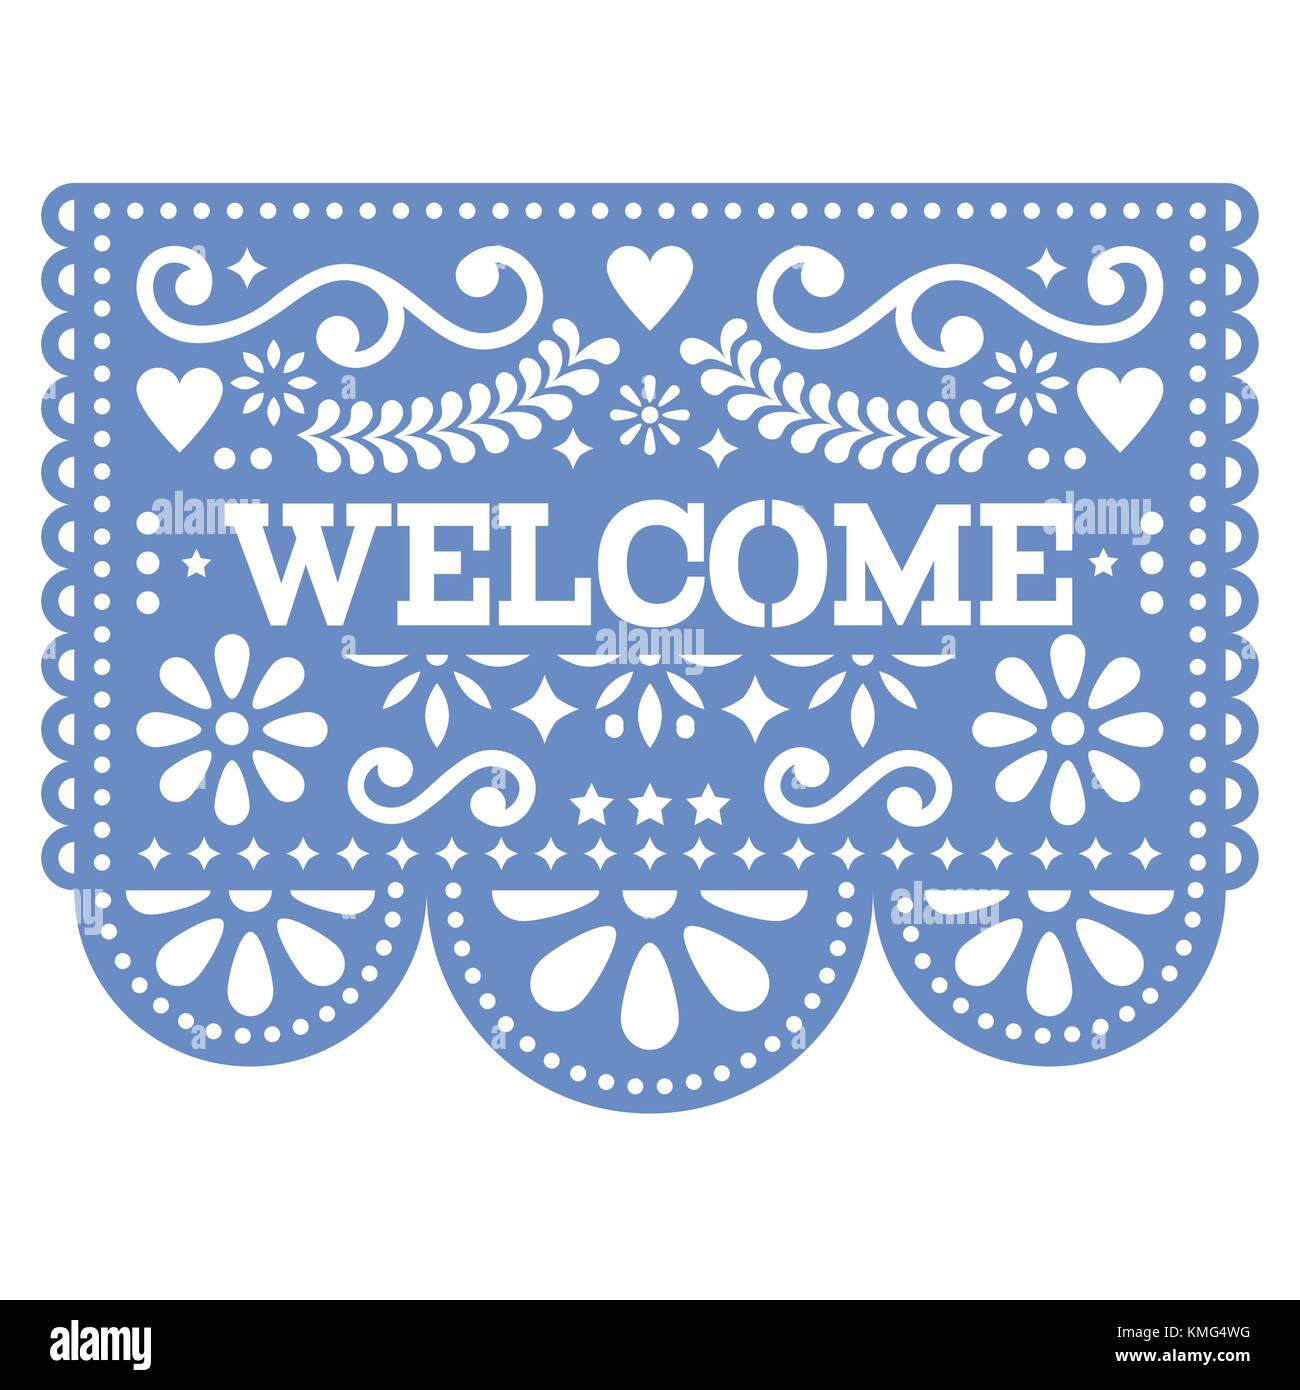 Papel Picado vector design - Welcome banner design, Mexican paper decorations, floral pattern Stock Vector